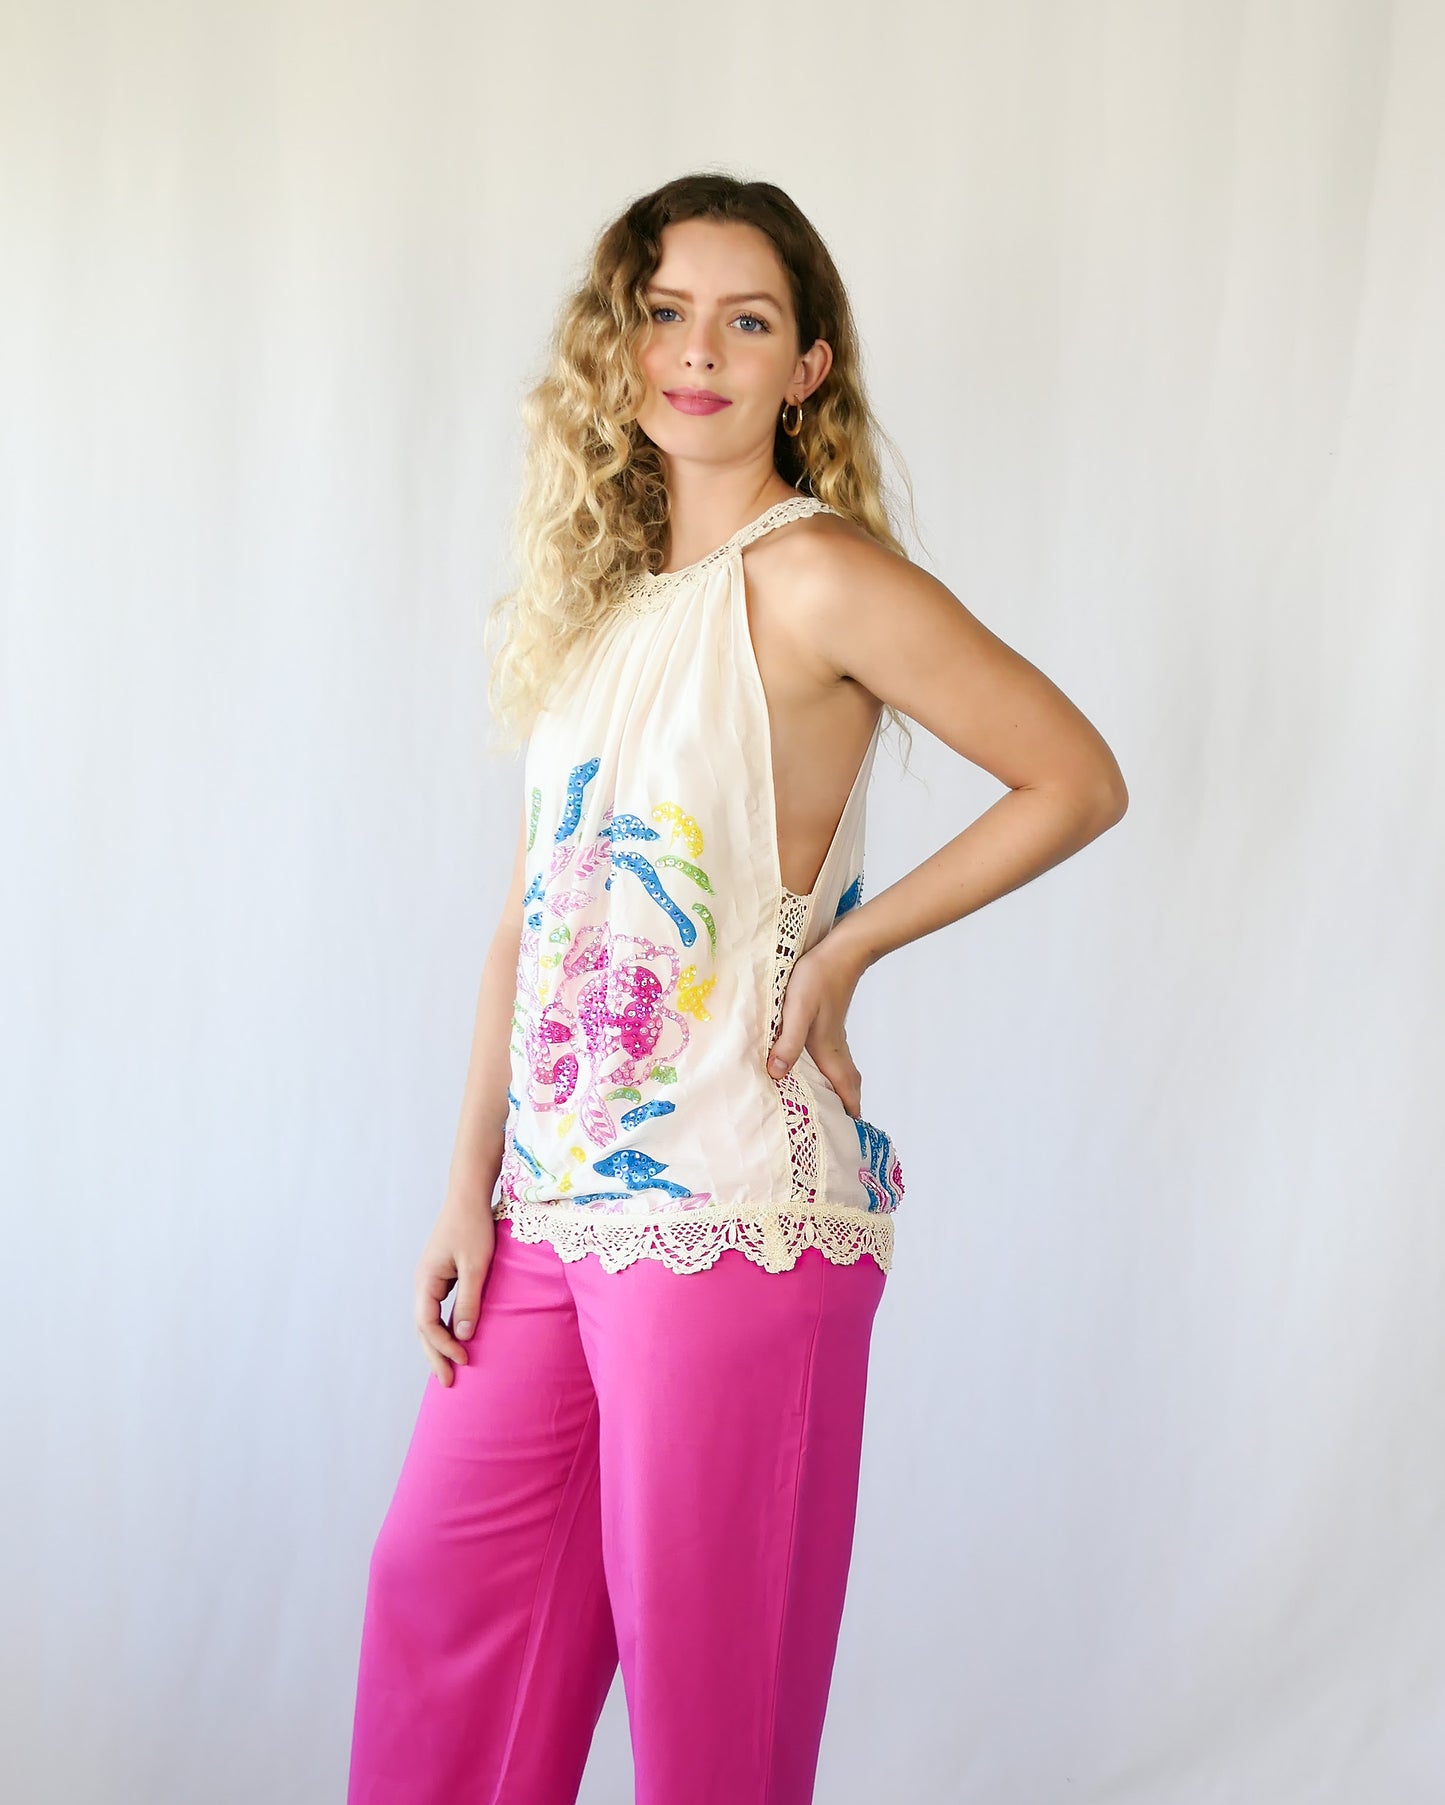 Show off your playful, whimsical side with this multicolored, handpainted and hand sequined silk halter top. Comes with hand crocheted trim at the hemline and neckline, and buttons up at the back. Dress it up with a pair of matching pink pants or silk ivory colored wide leg pants and pink or ivory colored heels.  Size: Small  Measurements:  Bust 41” Hem 40" Length 27” Color: Ivory  Material: 100% silk with cotton crochet trim.  Made by Lim's Vintage.